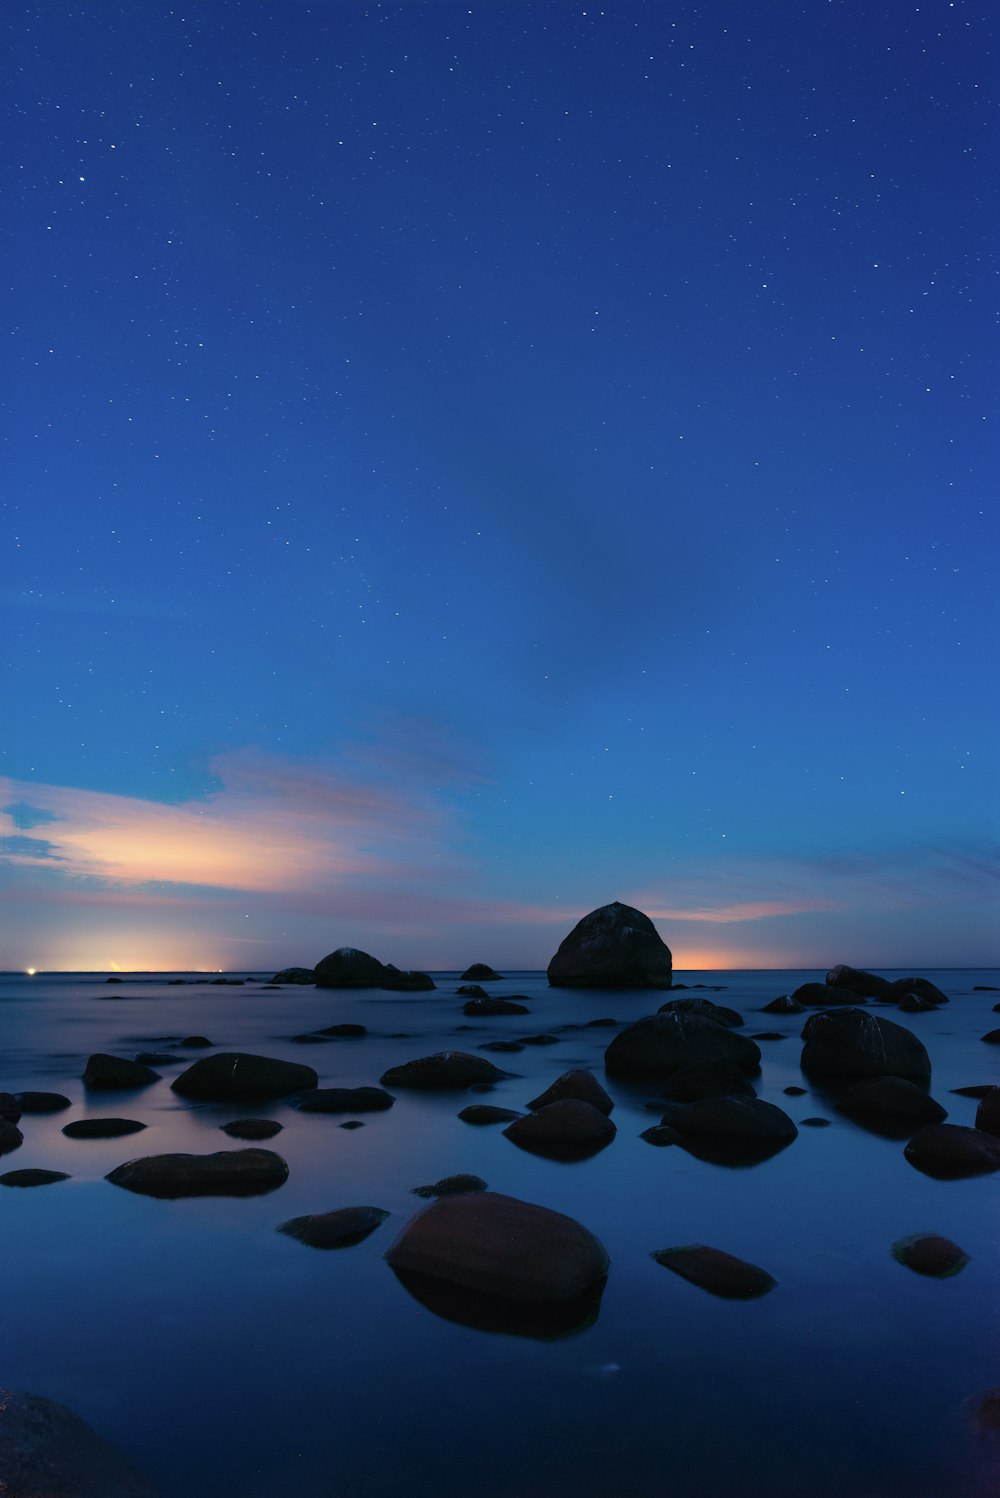 a body of water with rocks and a blue sky with stars